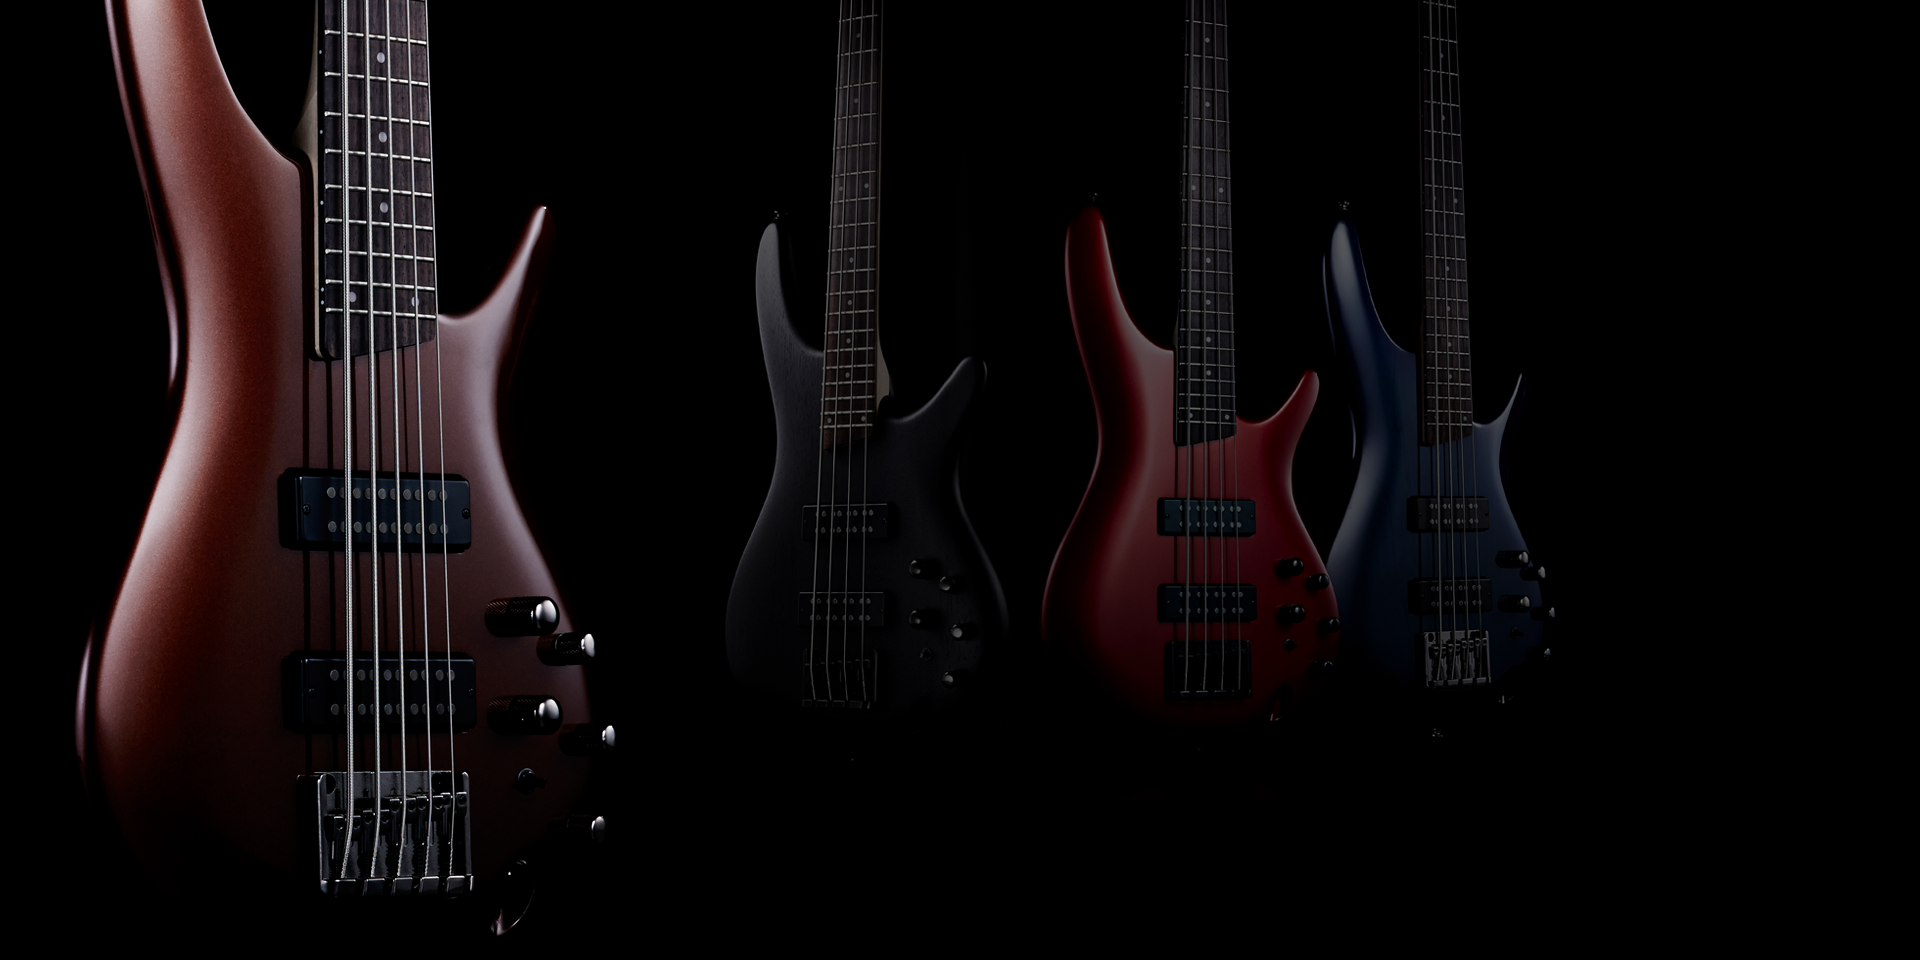 ALL NEW SR | FEATURE PRODUCTS | Ibanez guitars - アイバニーズ